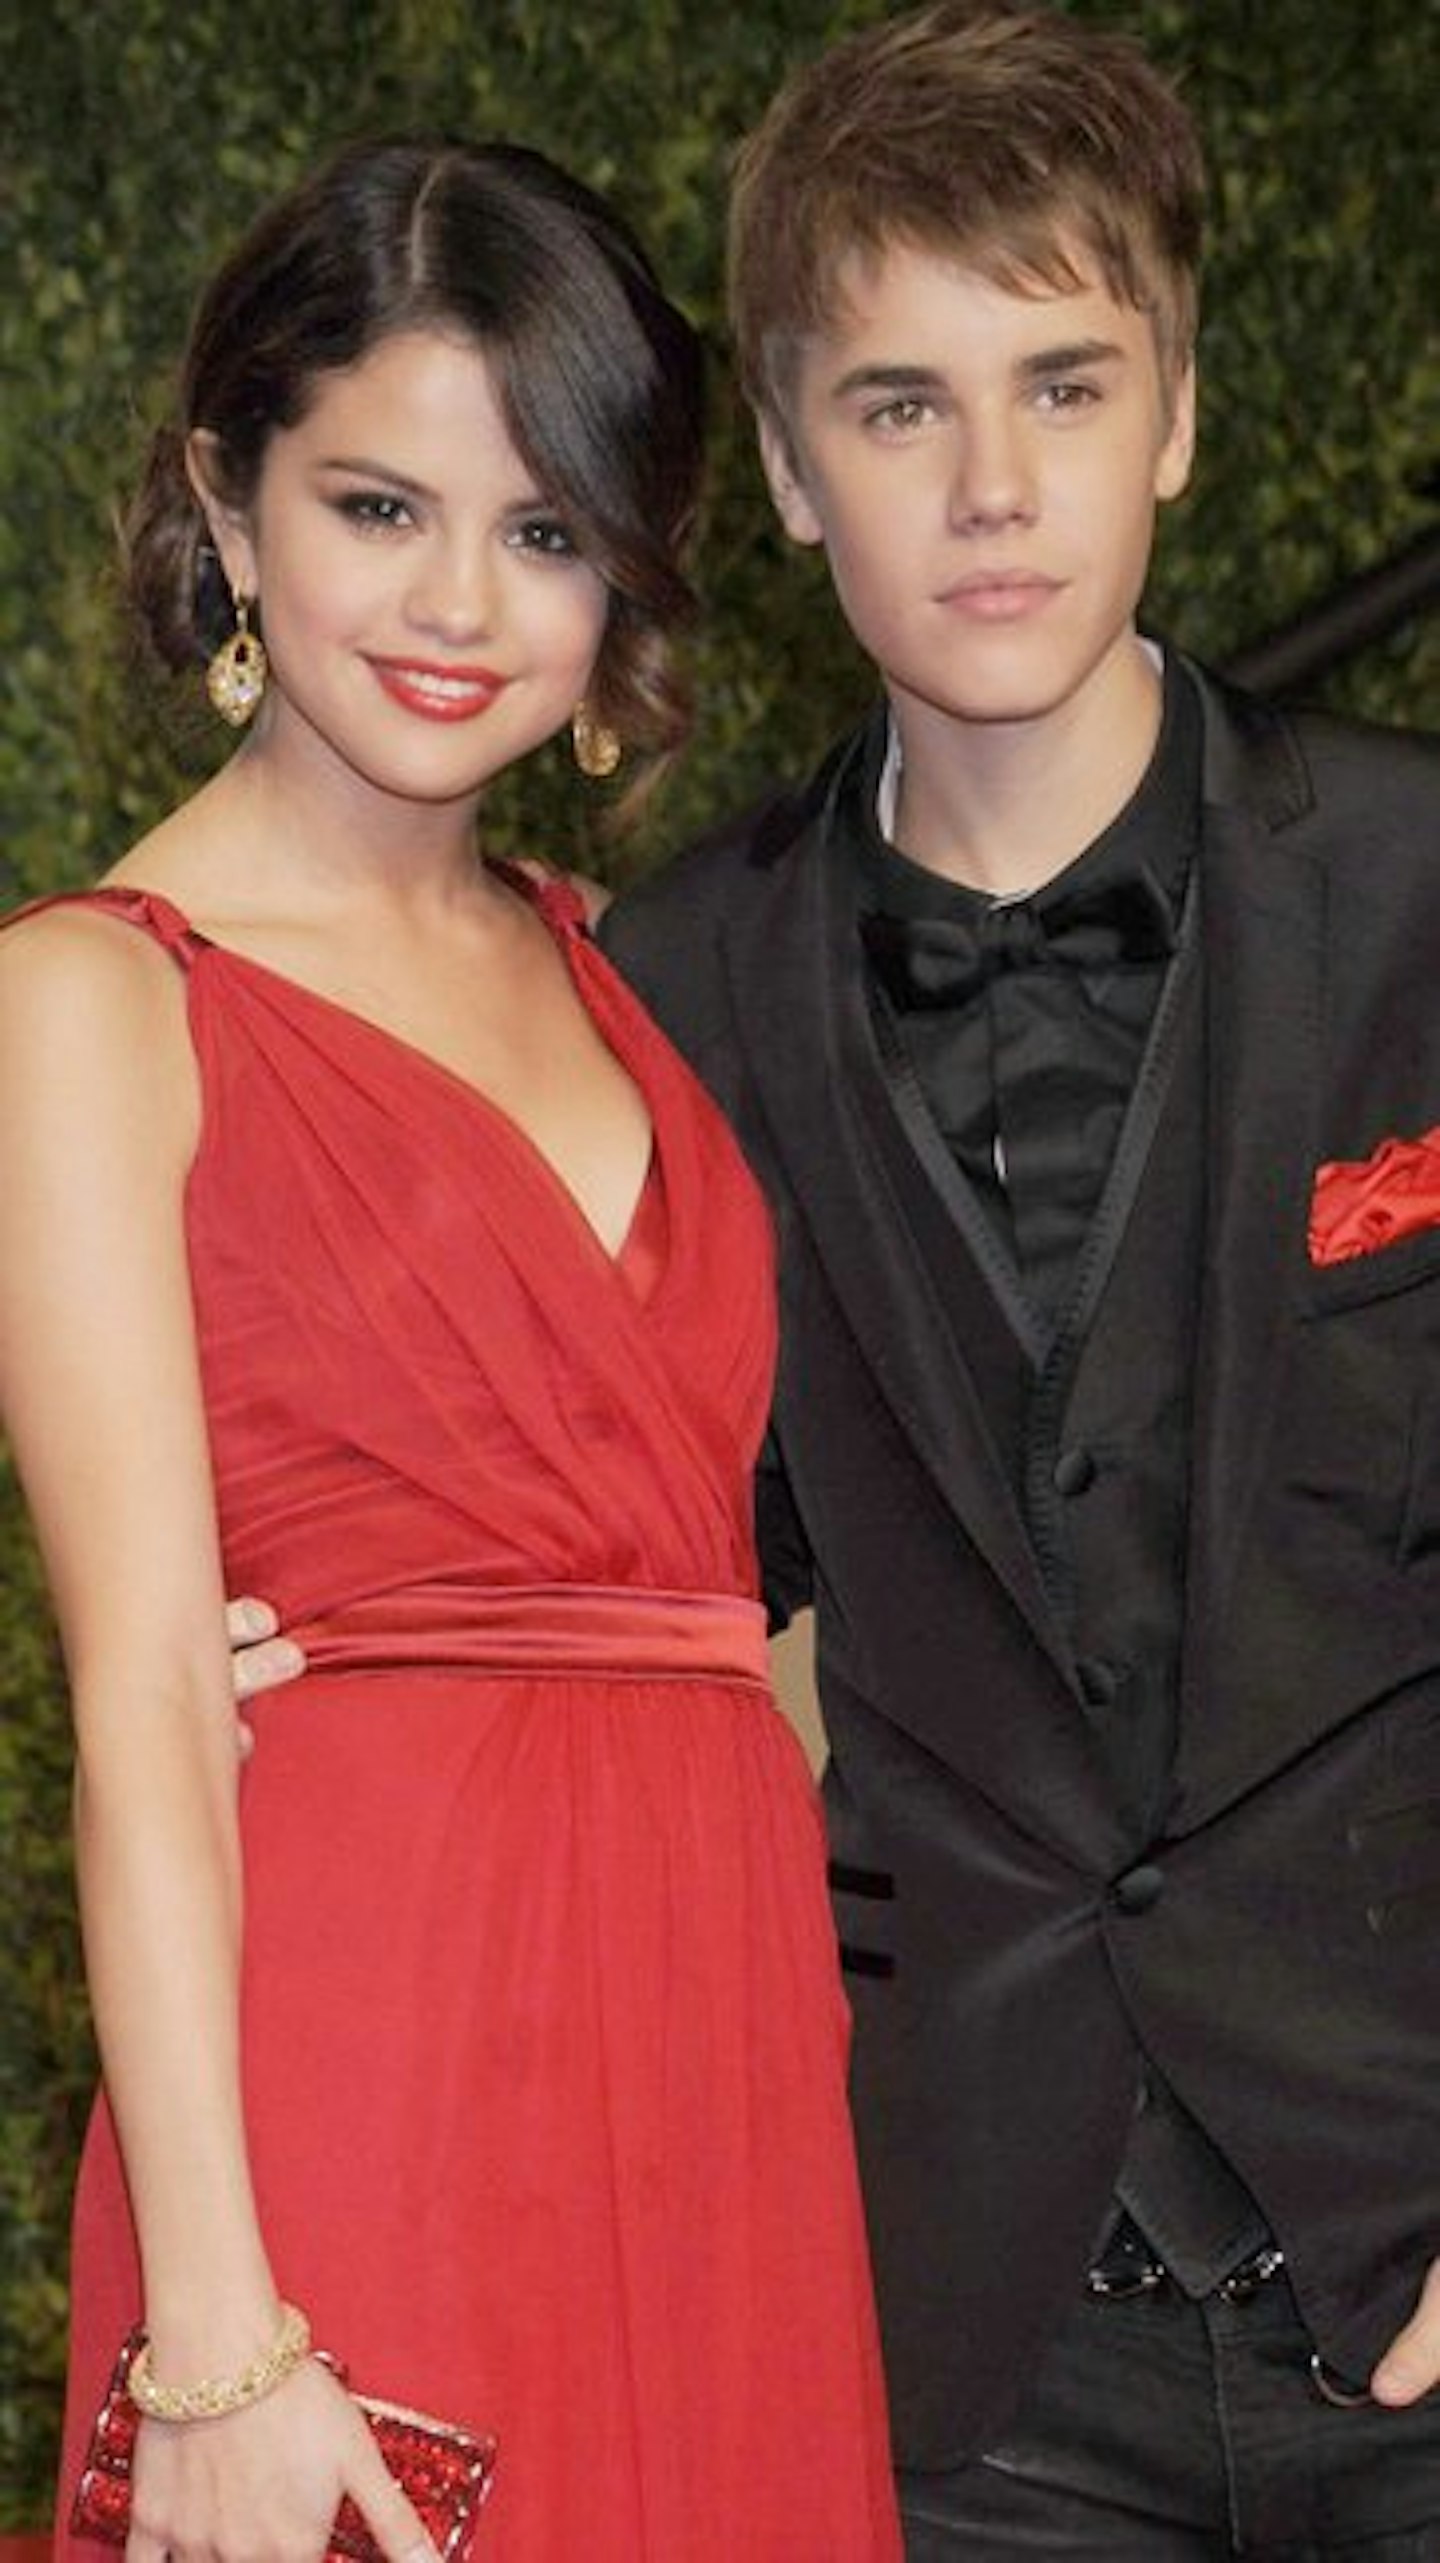 Justin and Selena had an on/off relationship before calling it quits in January last year.